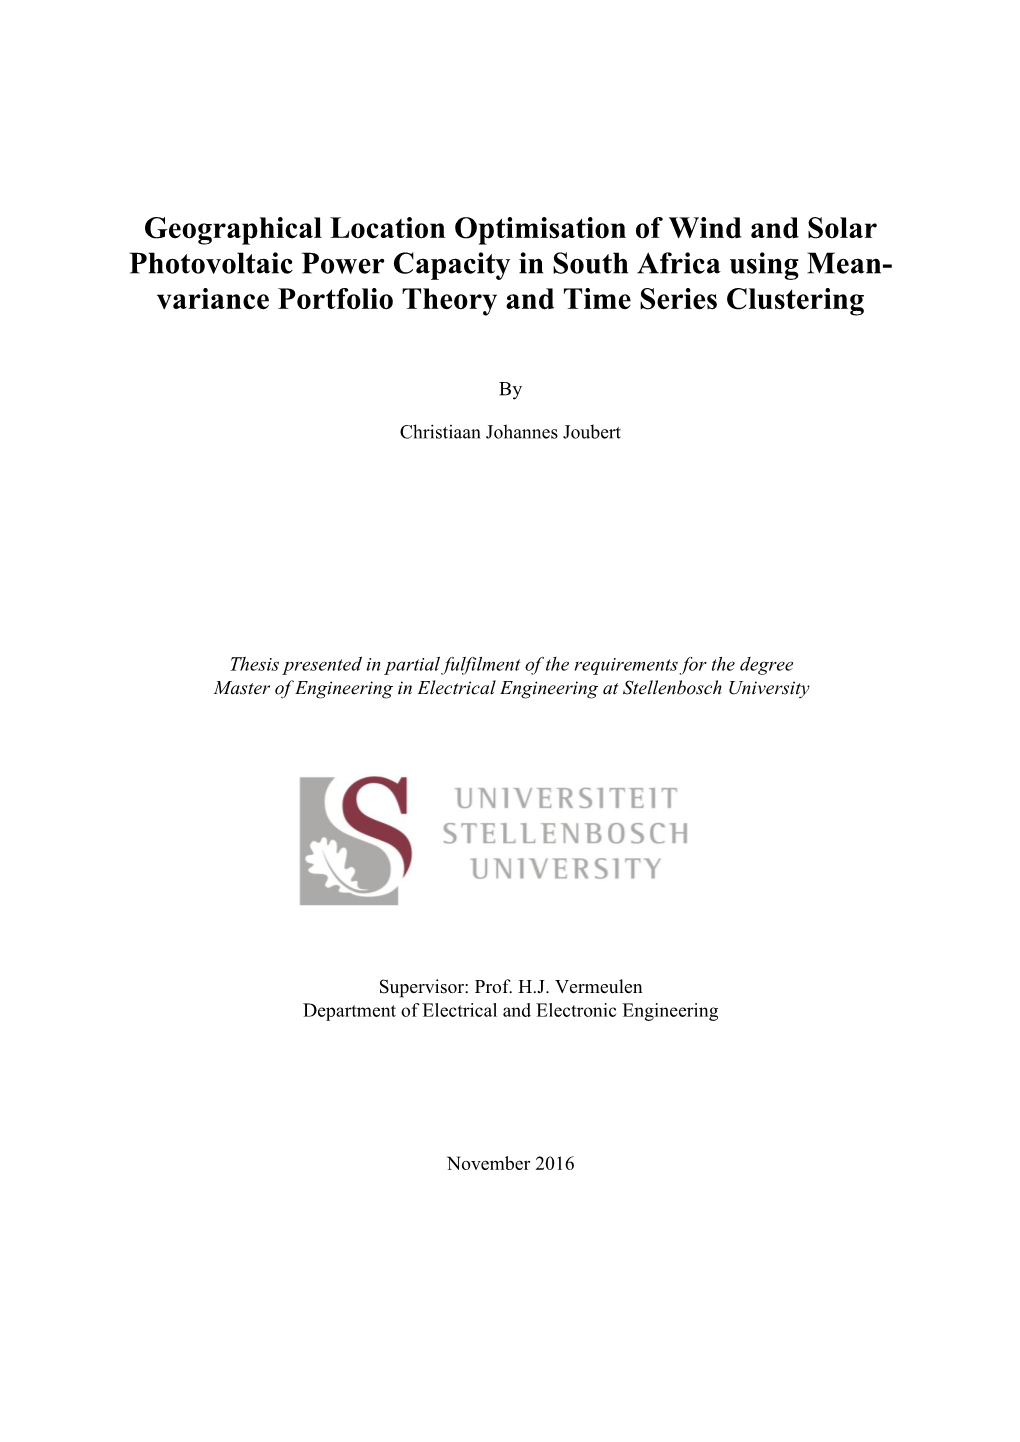 Geographical Location Optimisation of Wind and Solar Photovoltaic Power Capacity in South Africa Using Mean- Variance Portfolio Theory and Time Series Clustering